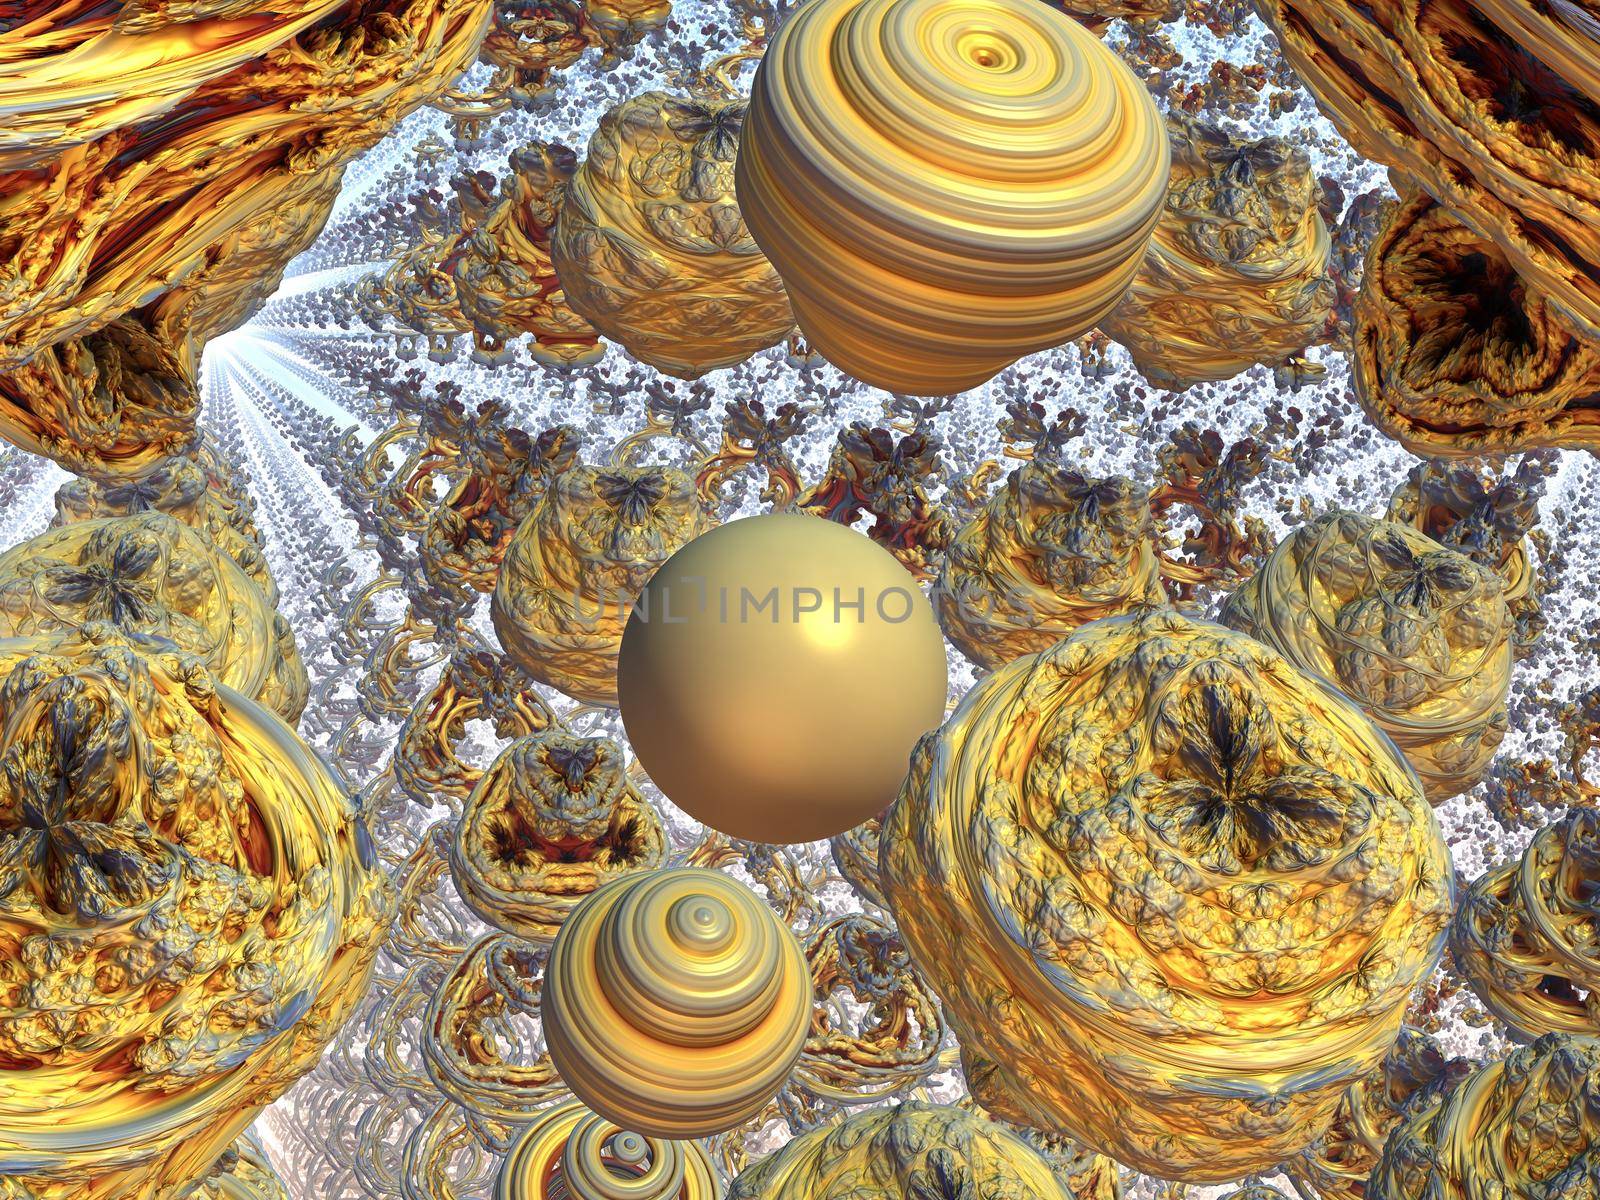 Picture of three-dimensional spaceship fractals in motion